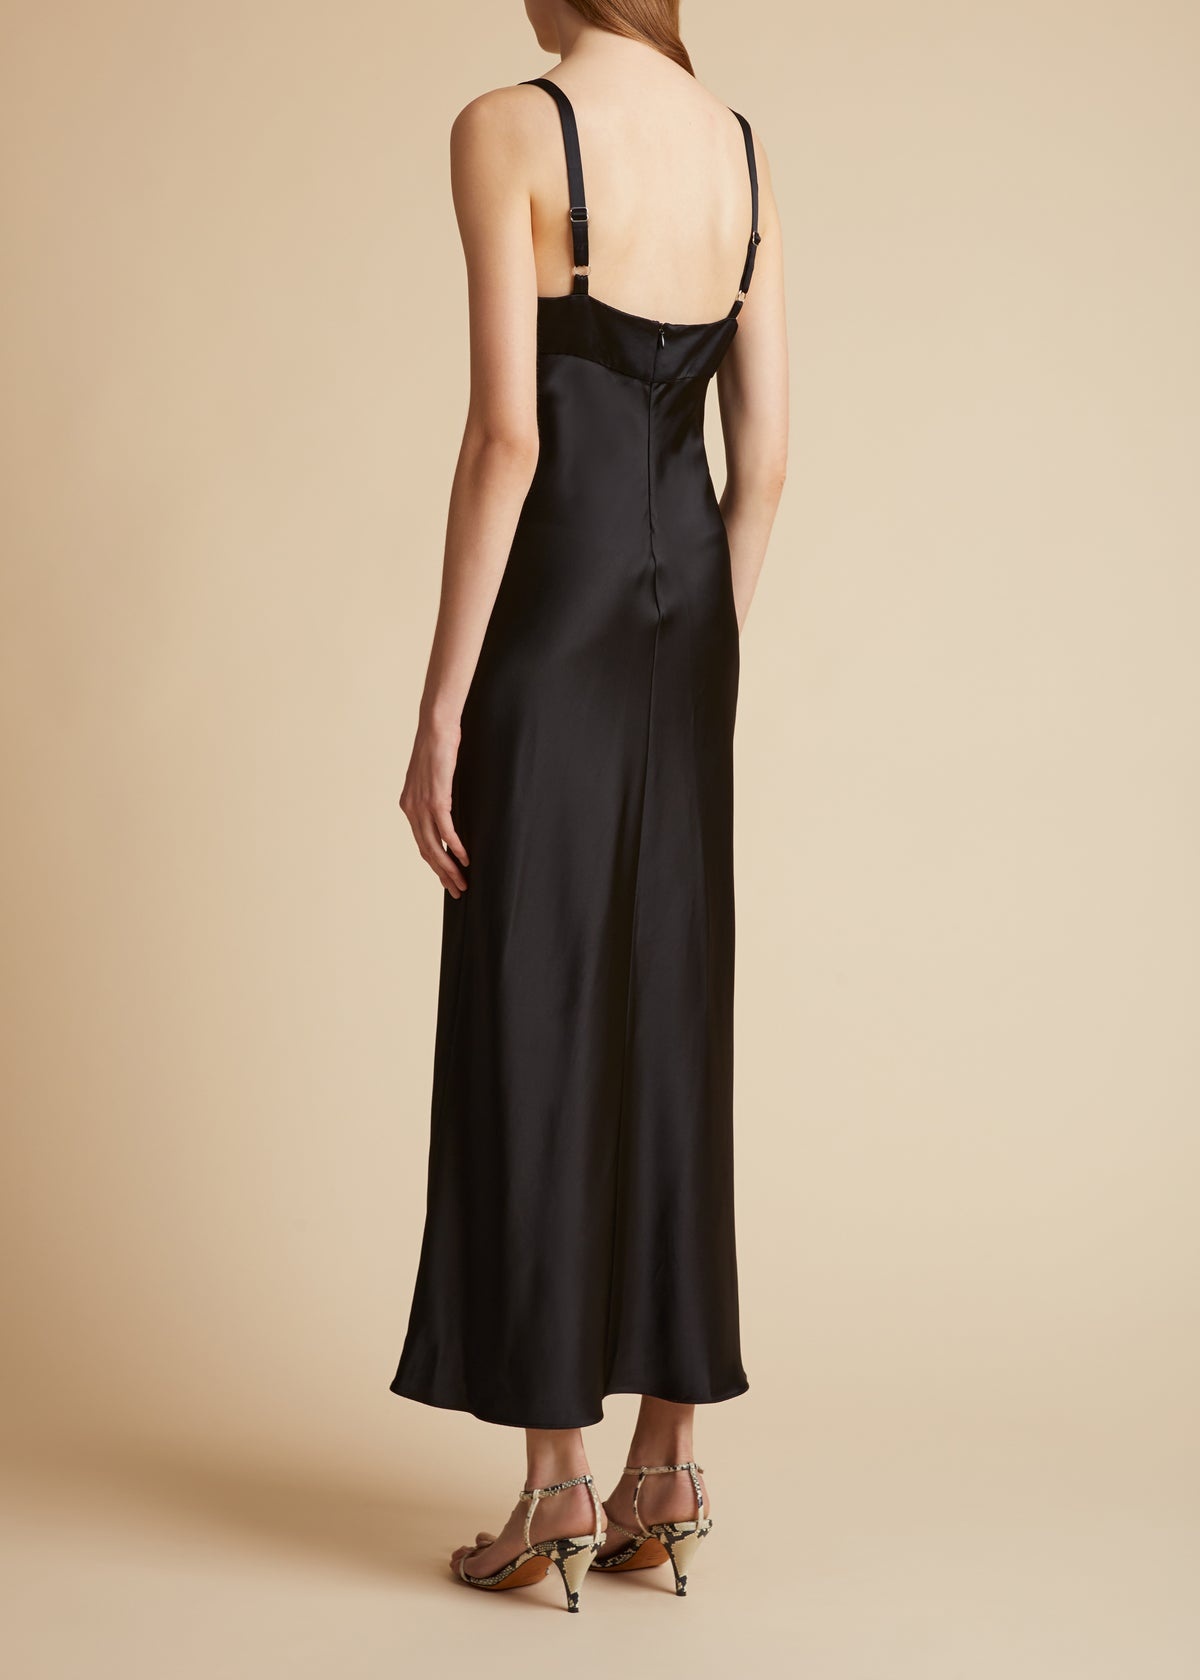 The Joely Dress in Black - 3